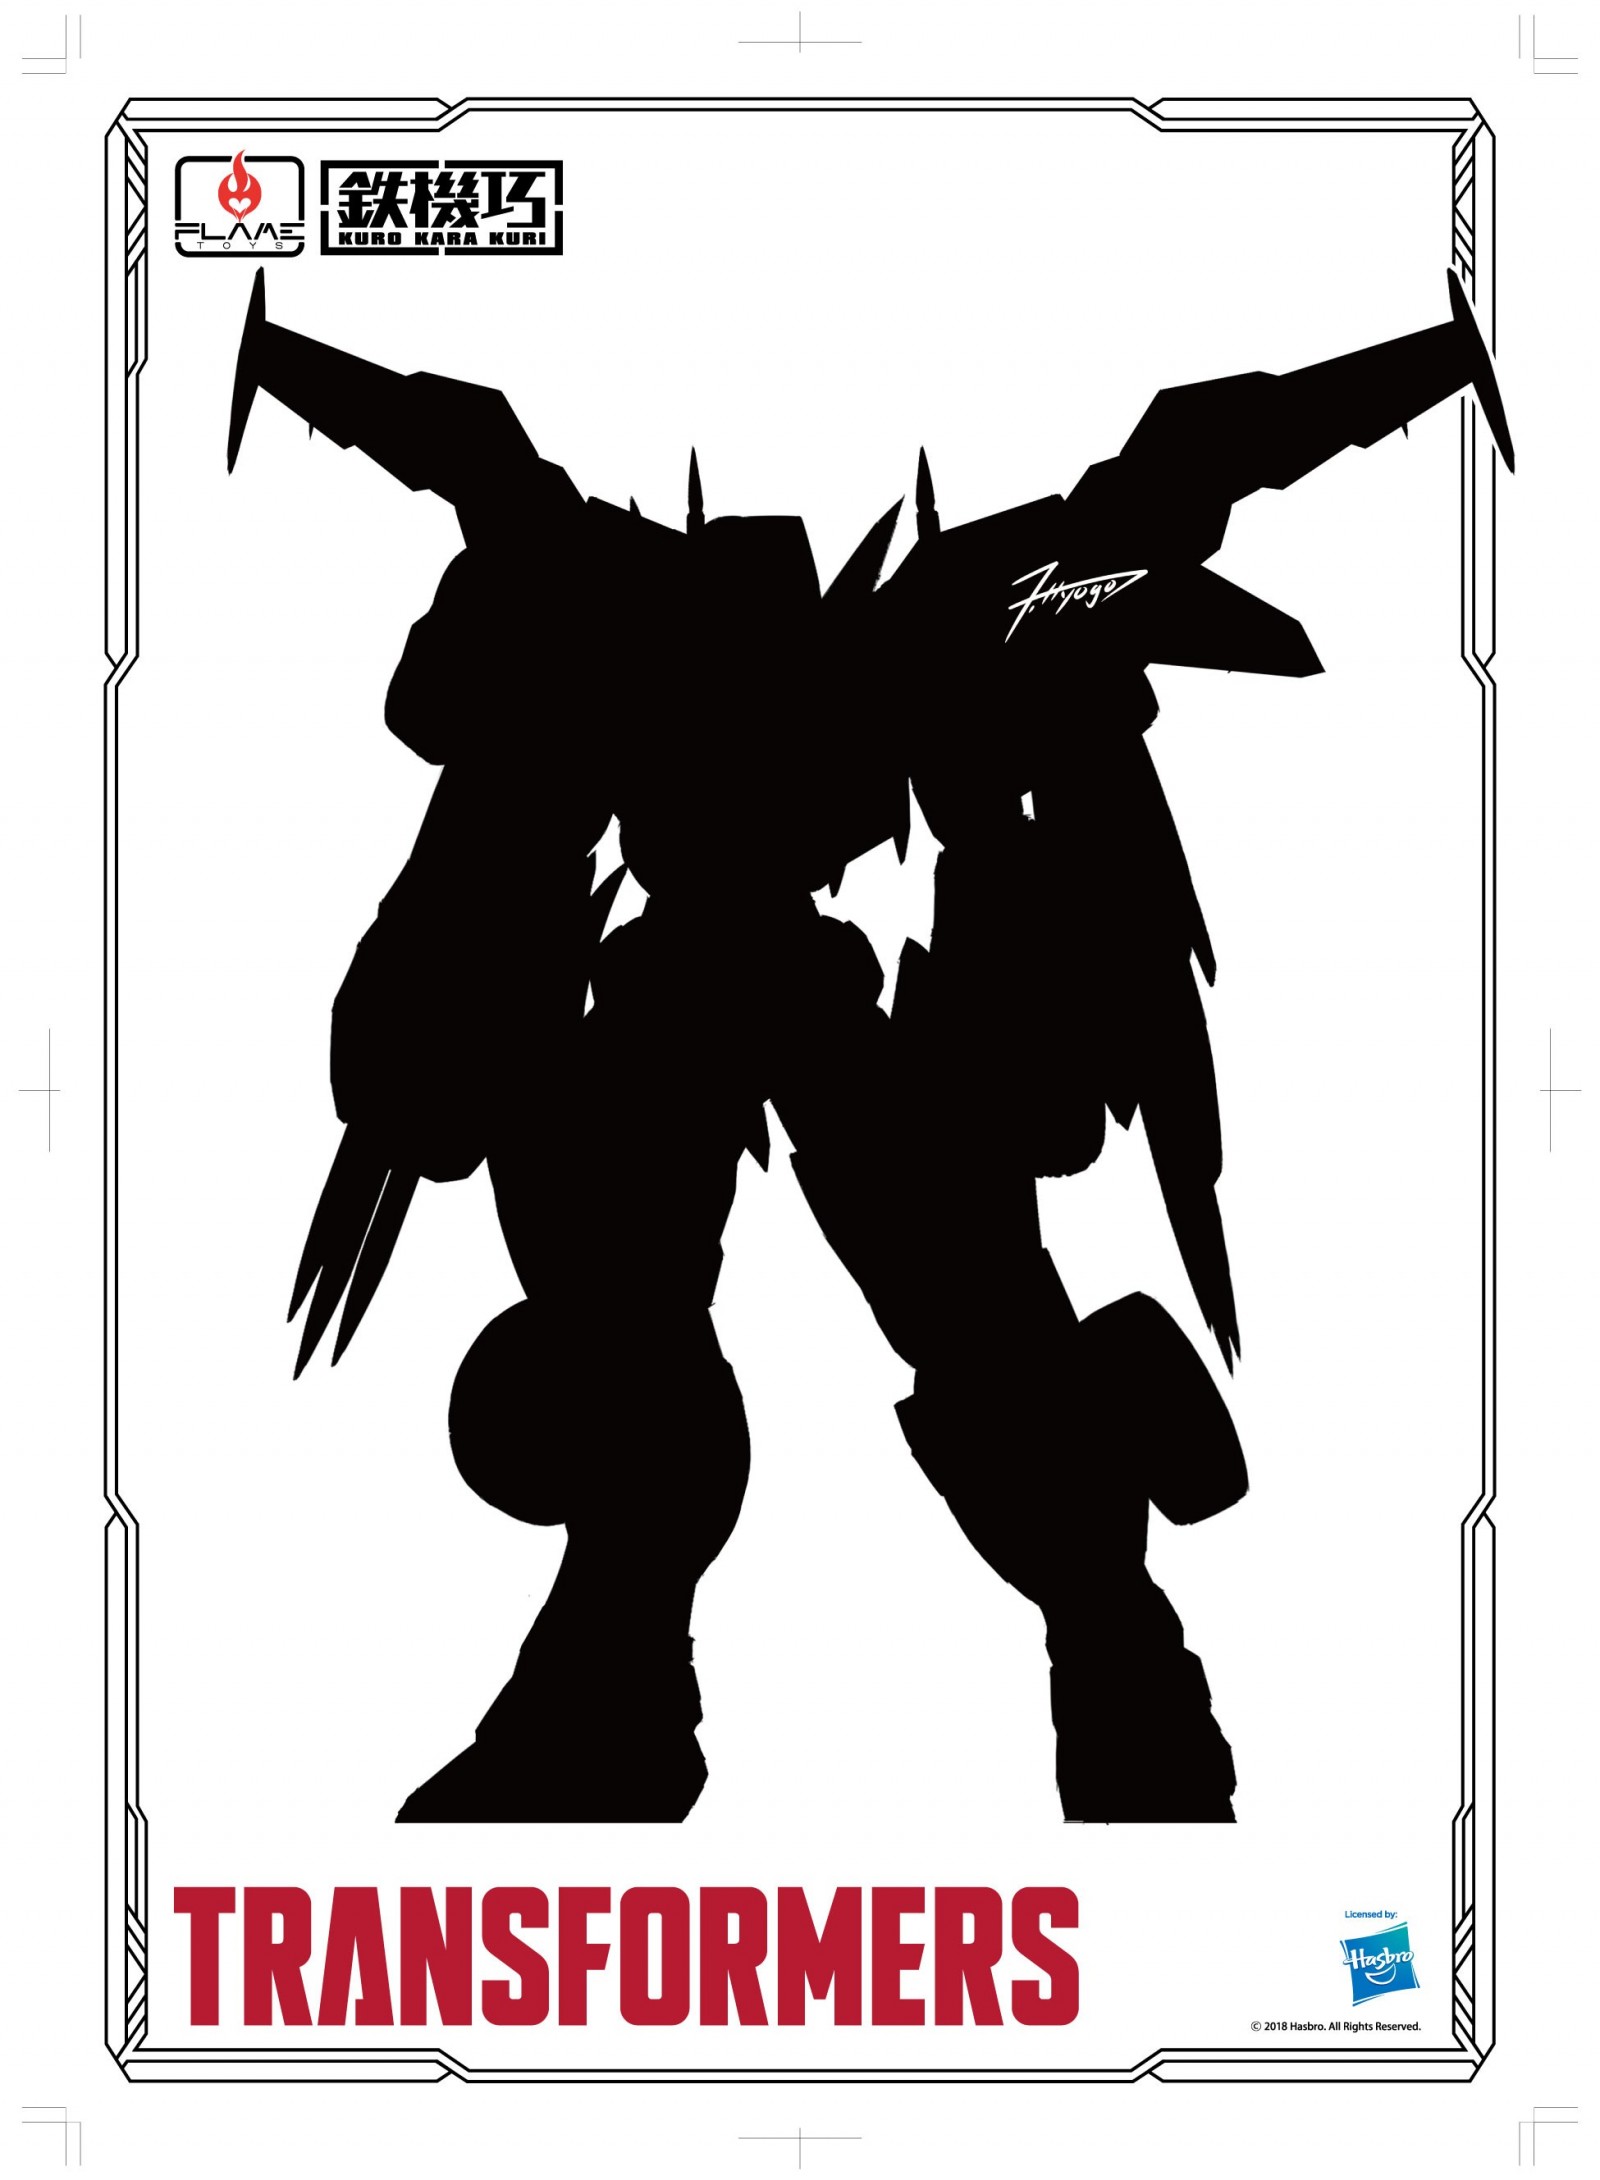 Transformers News: Flame Toys Model Kit and Action Figure Reveals - Stealth Bomber Megatron, Windblade, Rodimus, G1